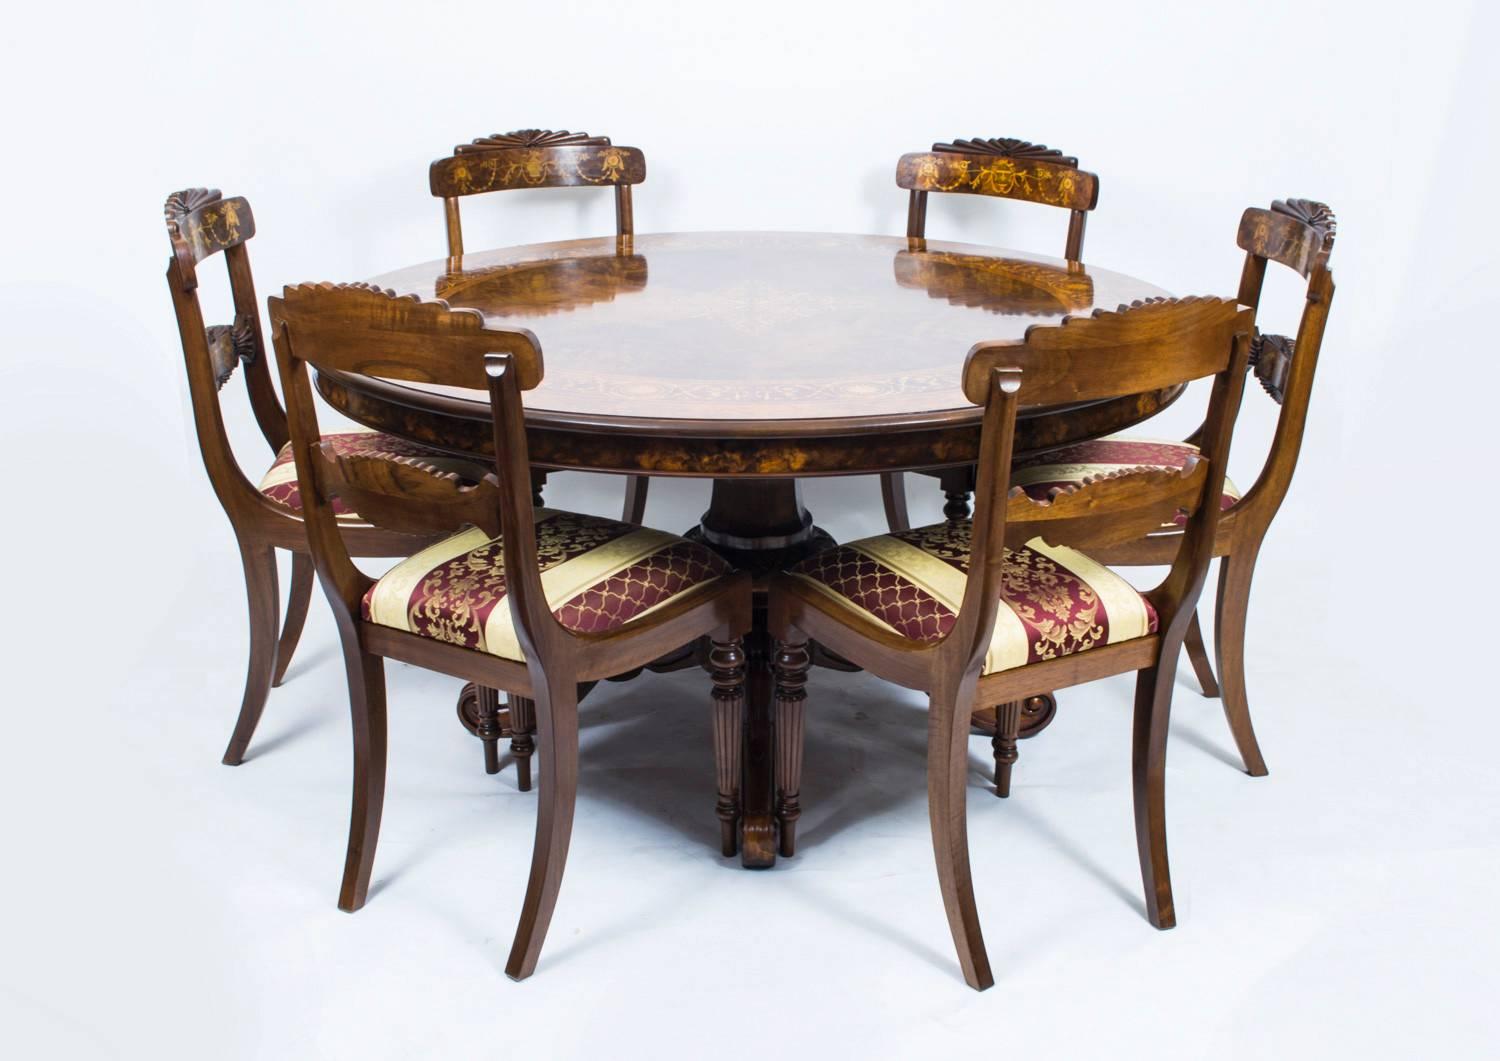 This is a stunning English marquetry centre table in fabulous Victorian style. 

The top is made from beautiful burr walnut with wonderful decoration of intricate hand cut marquetry with kingwood crossbanding. 

The four legged centre base means